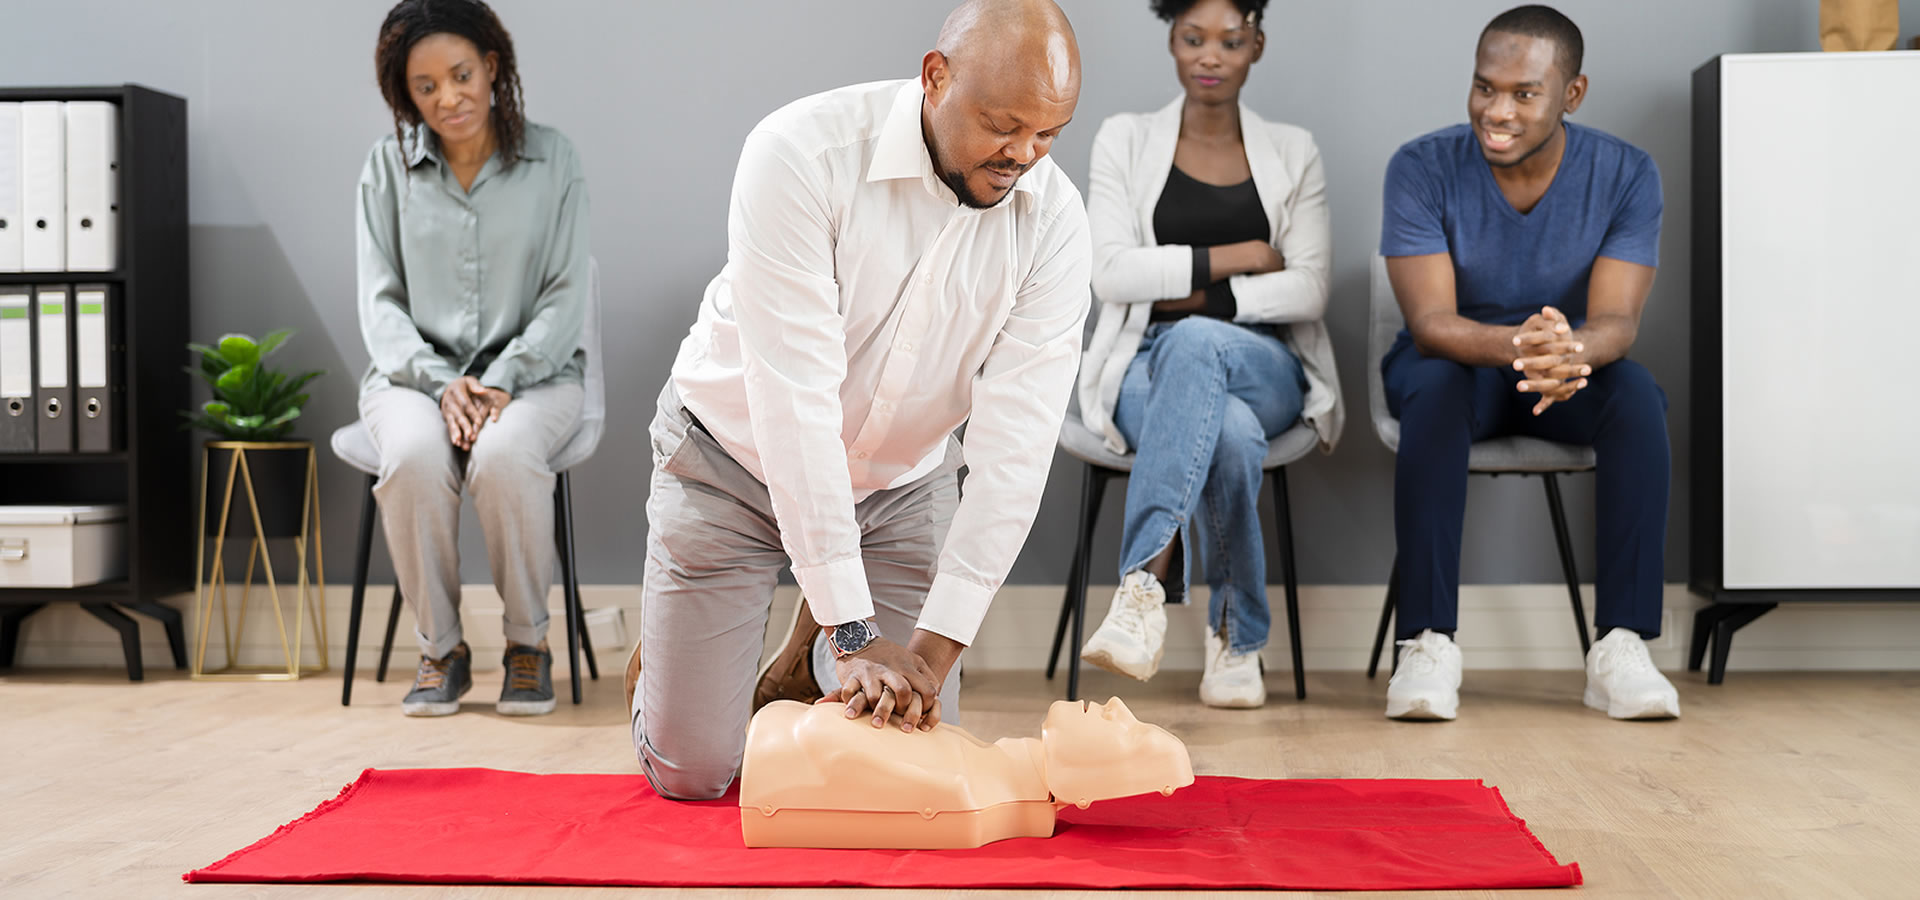 Jobs That Require CPR Certificates